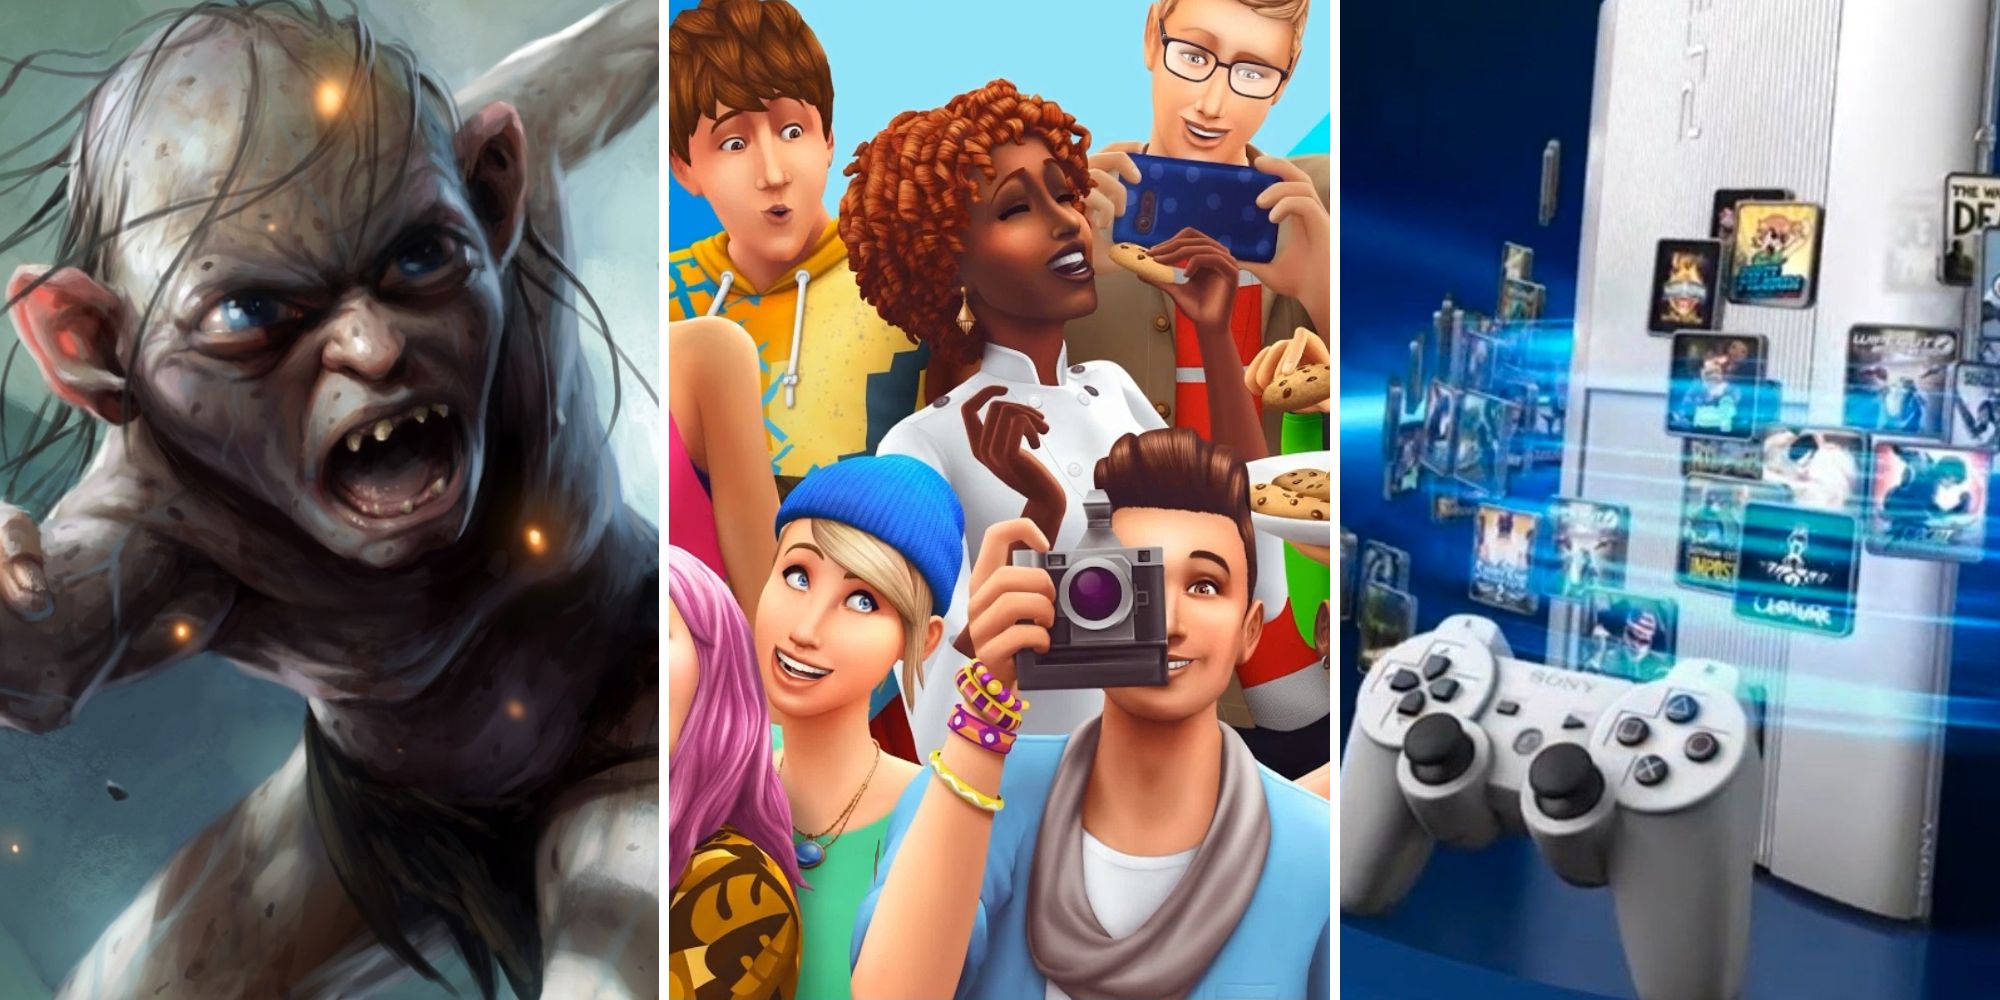 Gollum, characters from The Sims 4, and a PS3.